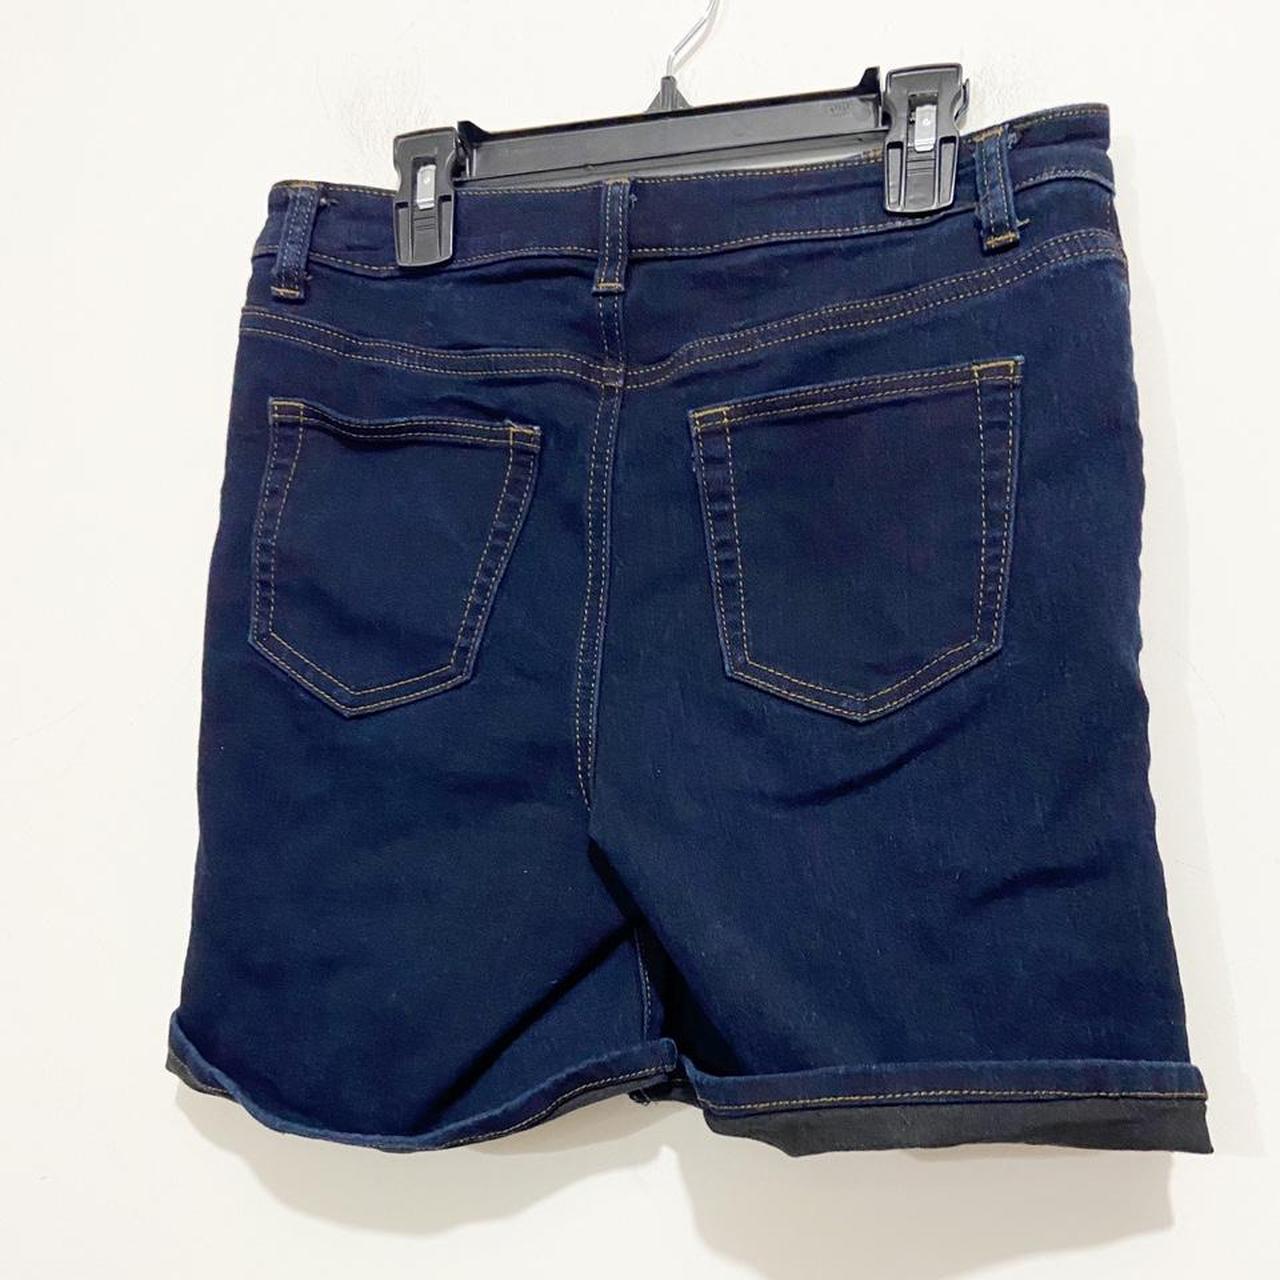 Product Image 3 - Faith Jeans Shorts. Stretch with